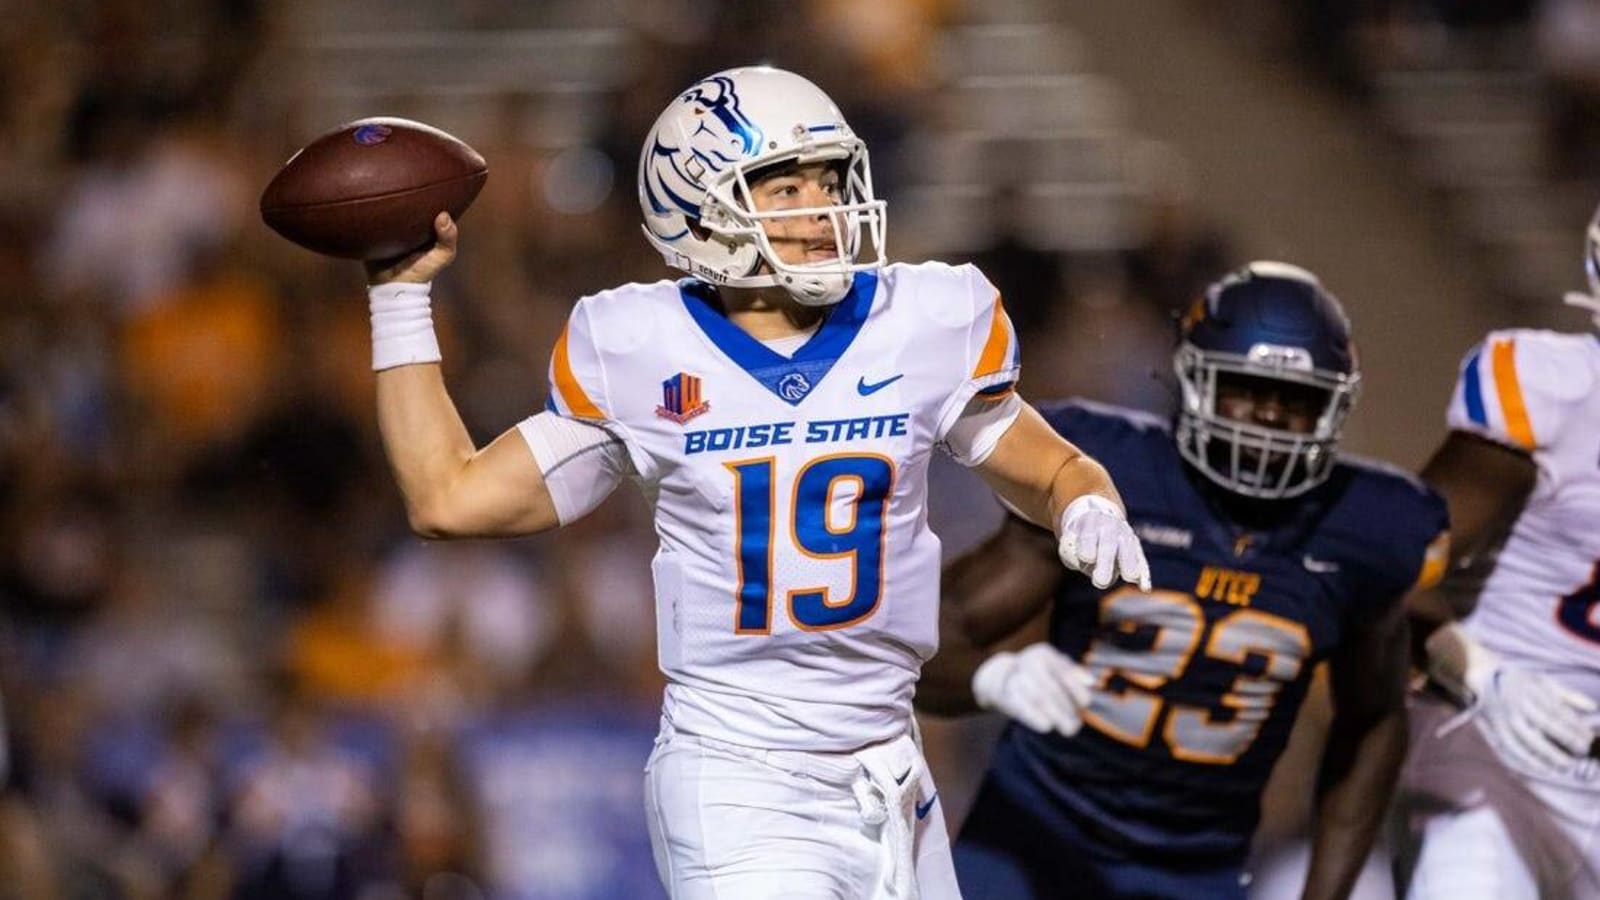 Reports: Boise State QB to transfer after OC&#39;s dismissal